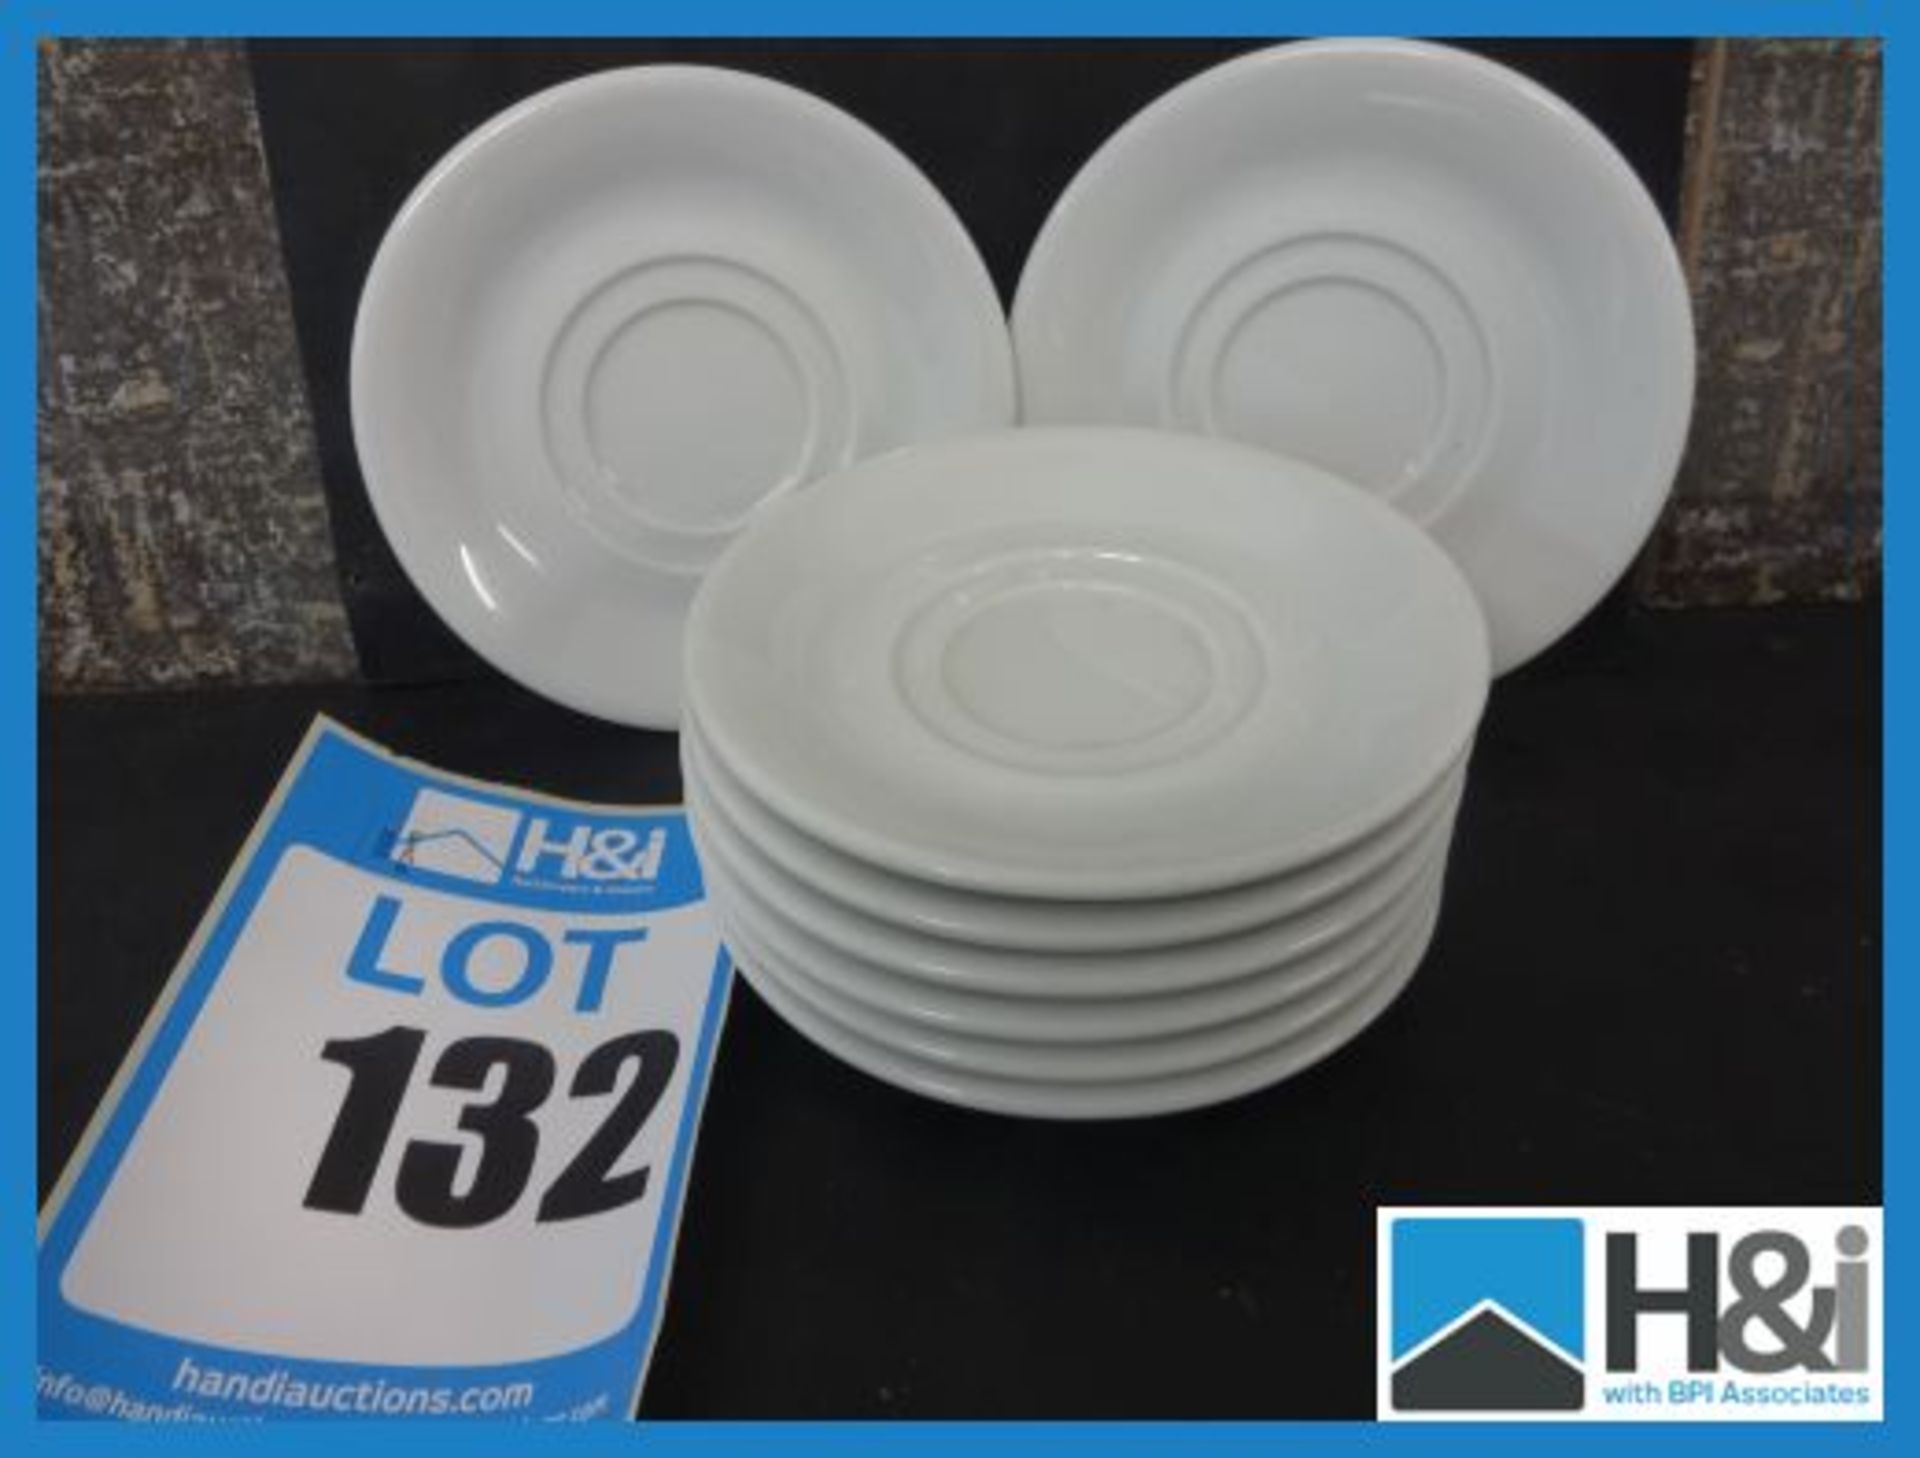 8 x Saucers 150mm Diameter Appraisal: Good Serial No: NA Location: H&I Ltd., The Auction House,